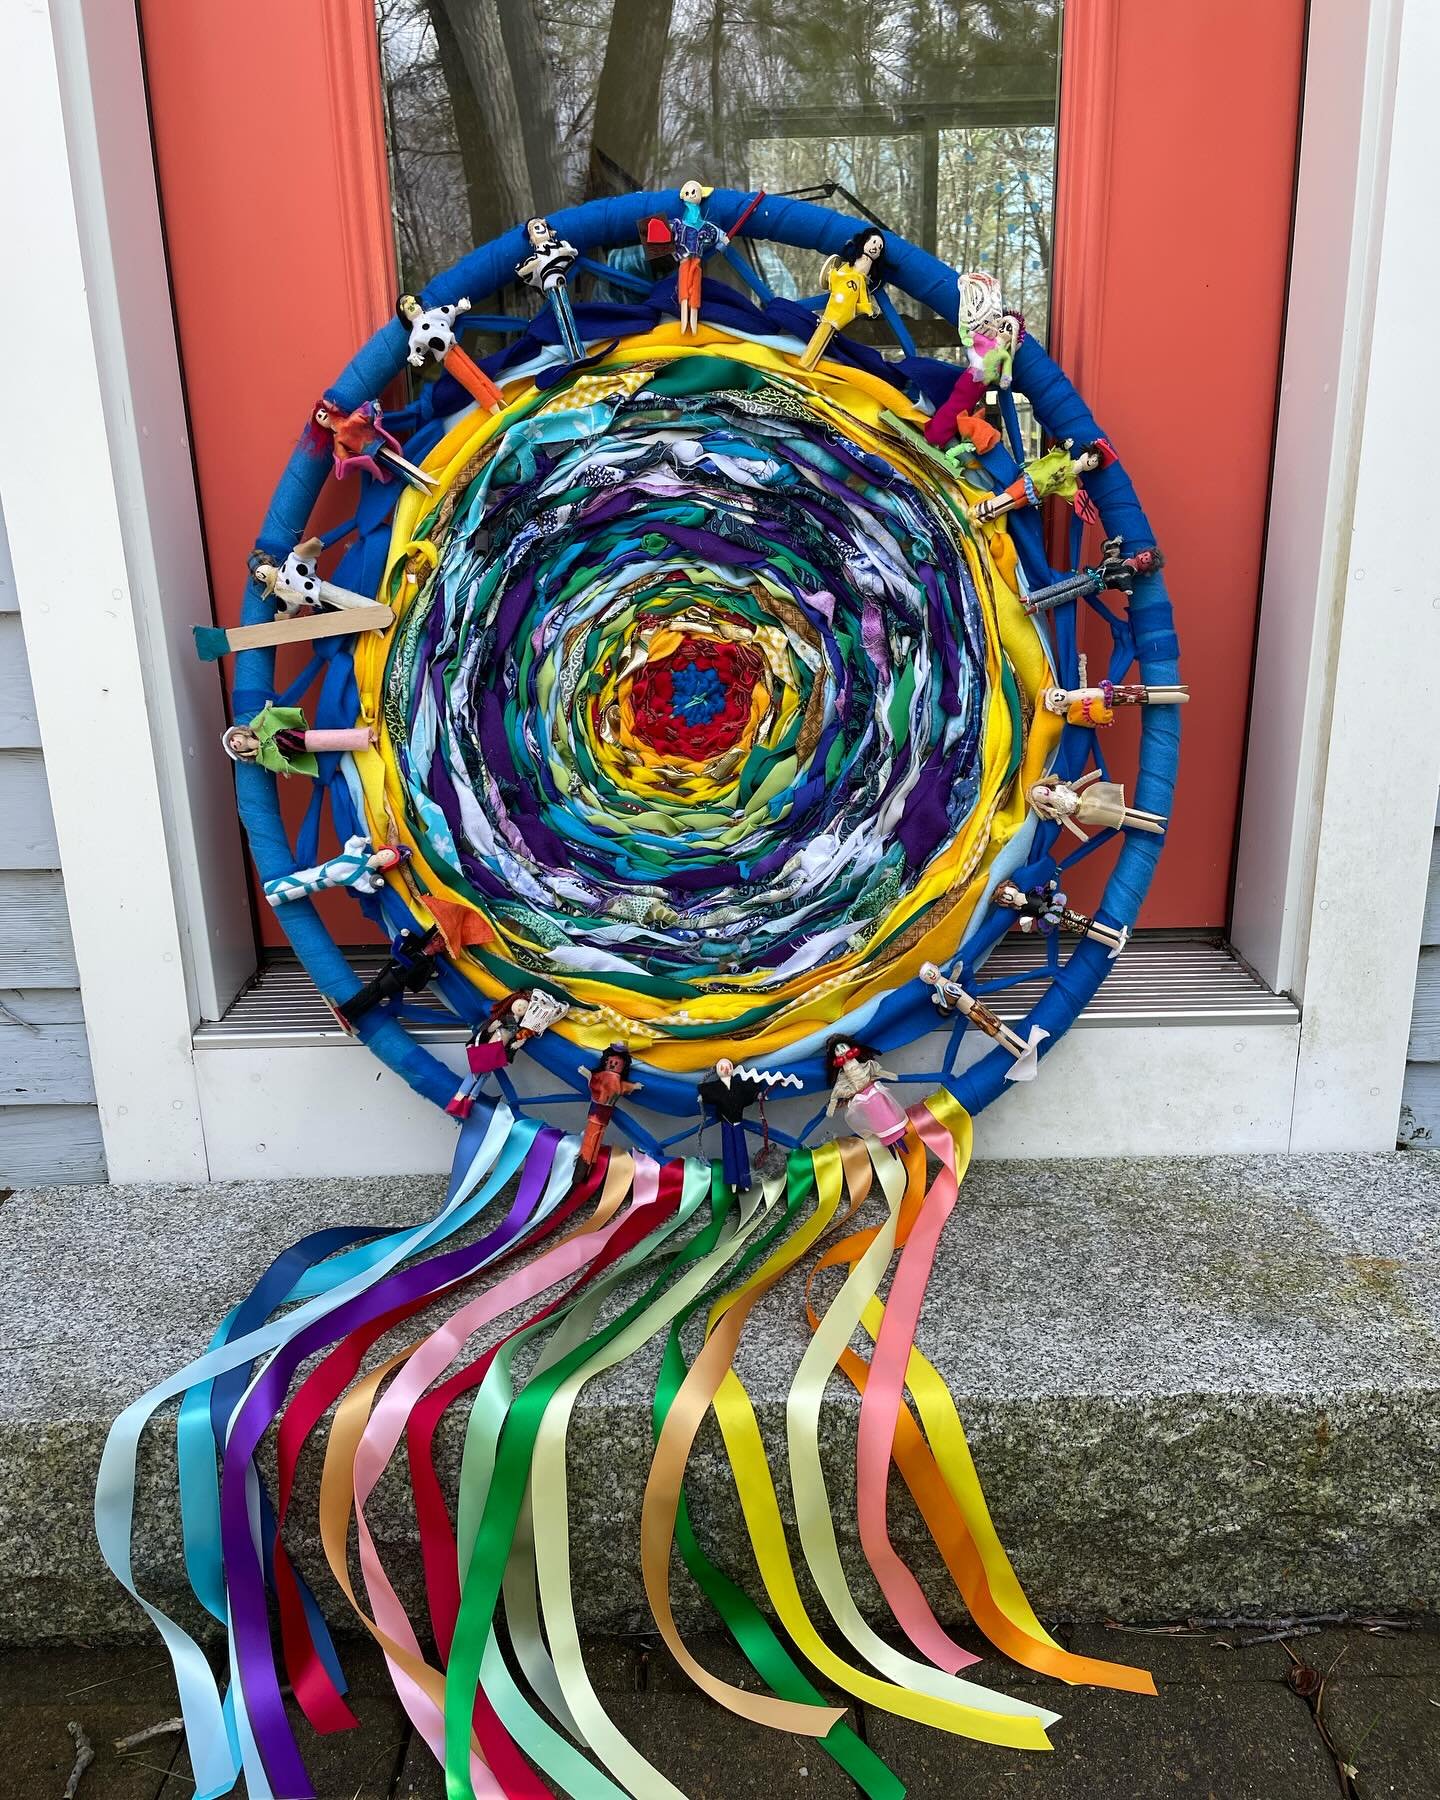 Mandala community weaving 
➰ 
woven by first and second graders in New Hampshire. 
🖐🏼🤚🏾🖐️
The colors reflect the temperature of the day. It was added onto continually for months. 
⭐️
Then students made the clothes pin people dressed according to